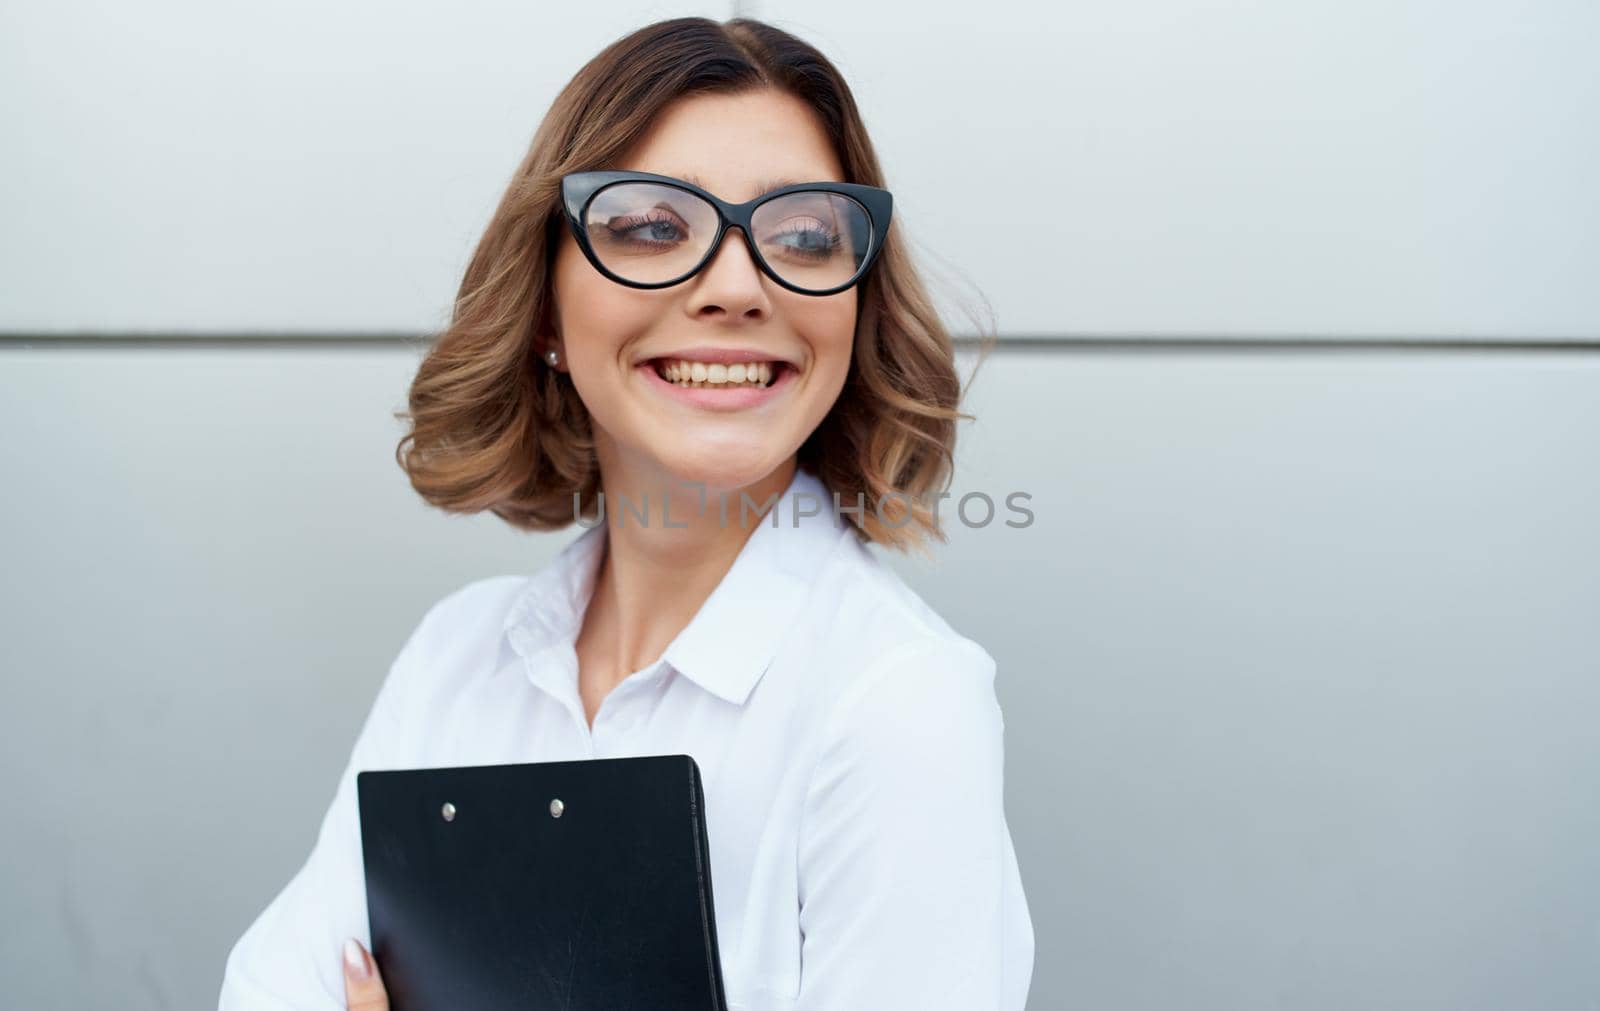 happy businesswoman near building with documents in hands and glasses on face cropped view by SHOTPRIME